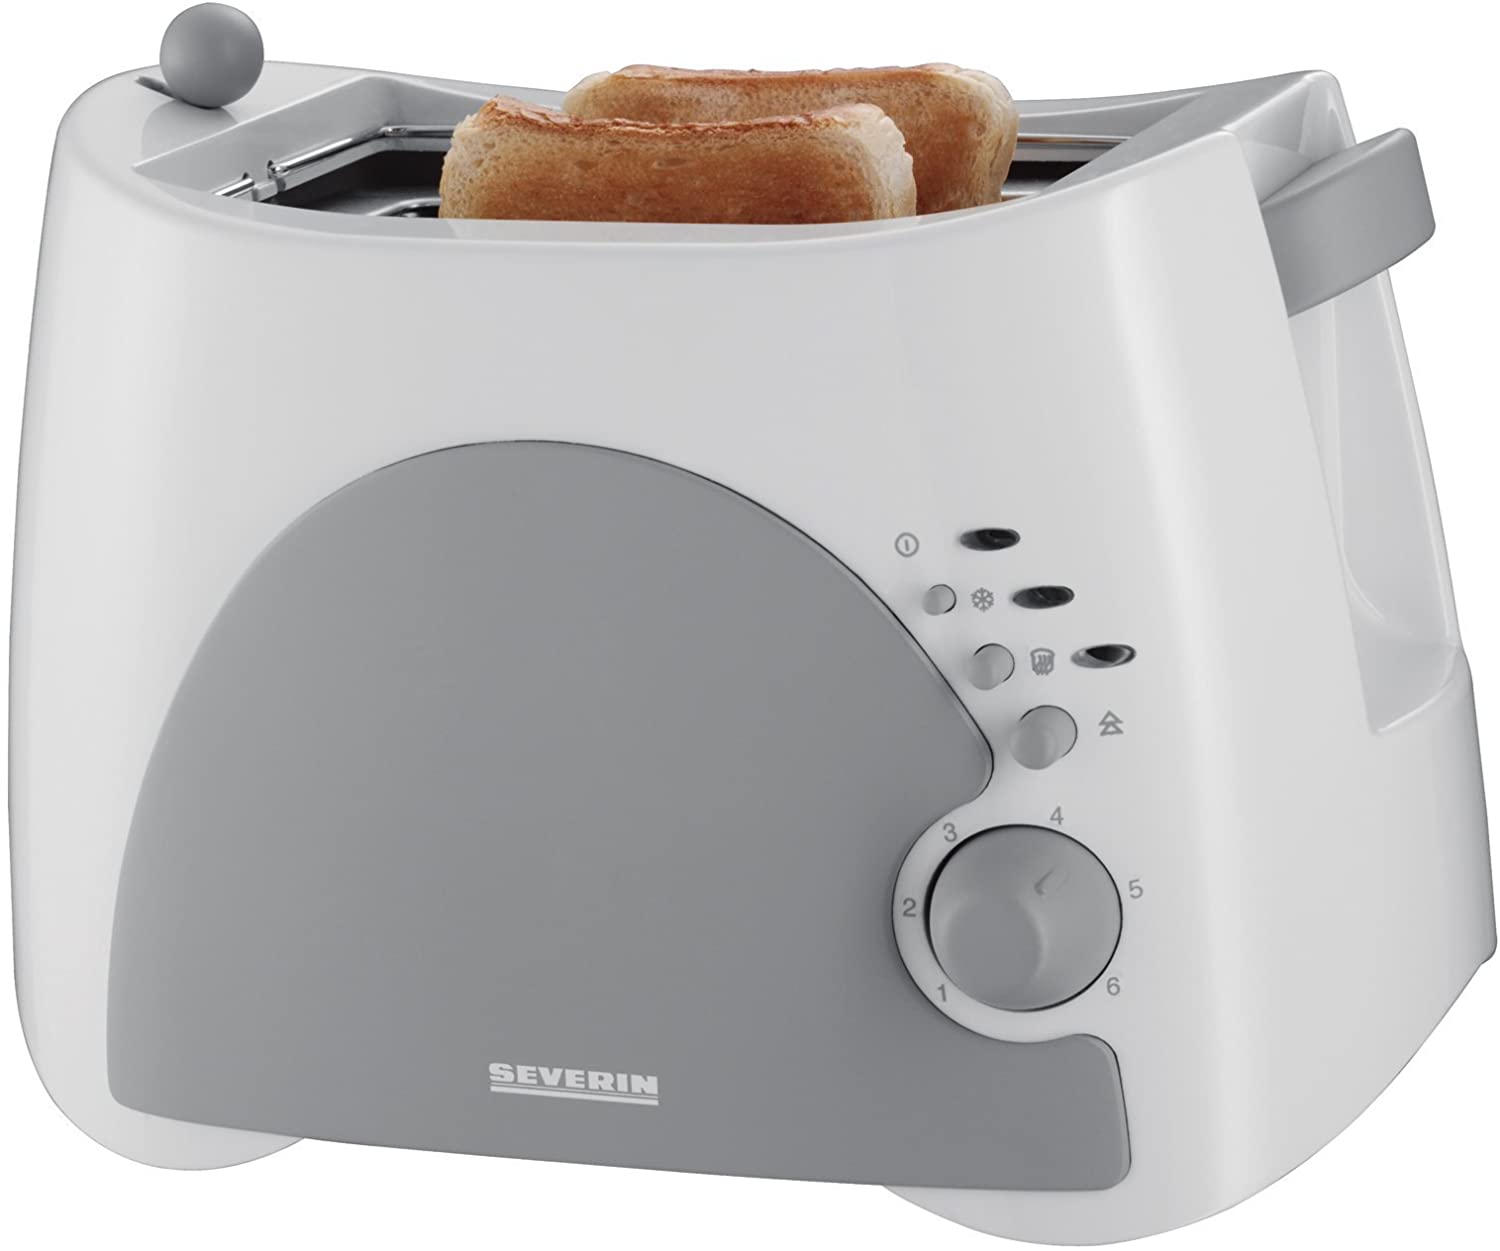 Severin AT 2540 Automatic Toaster white 900 W